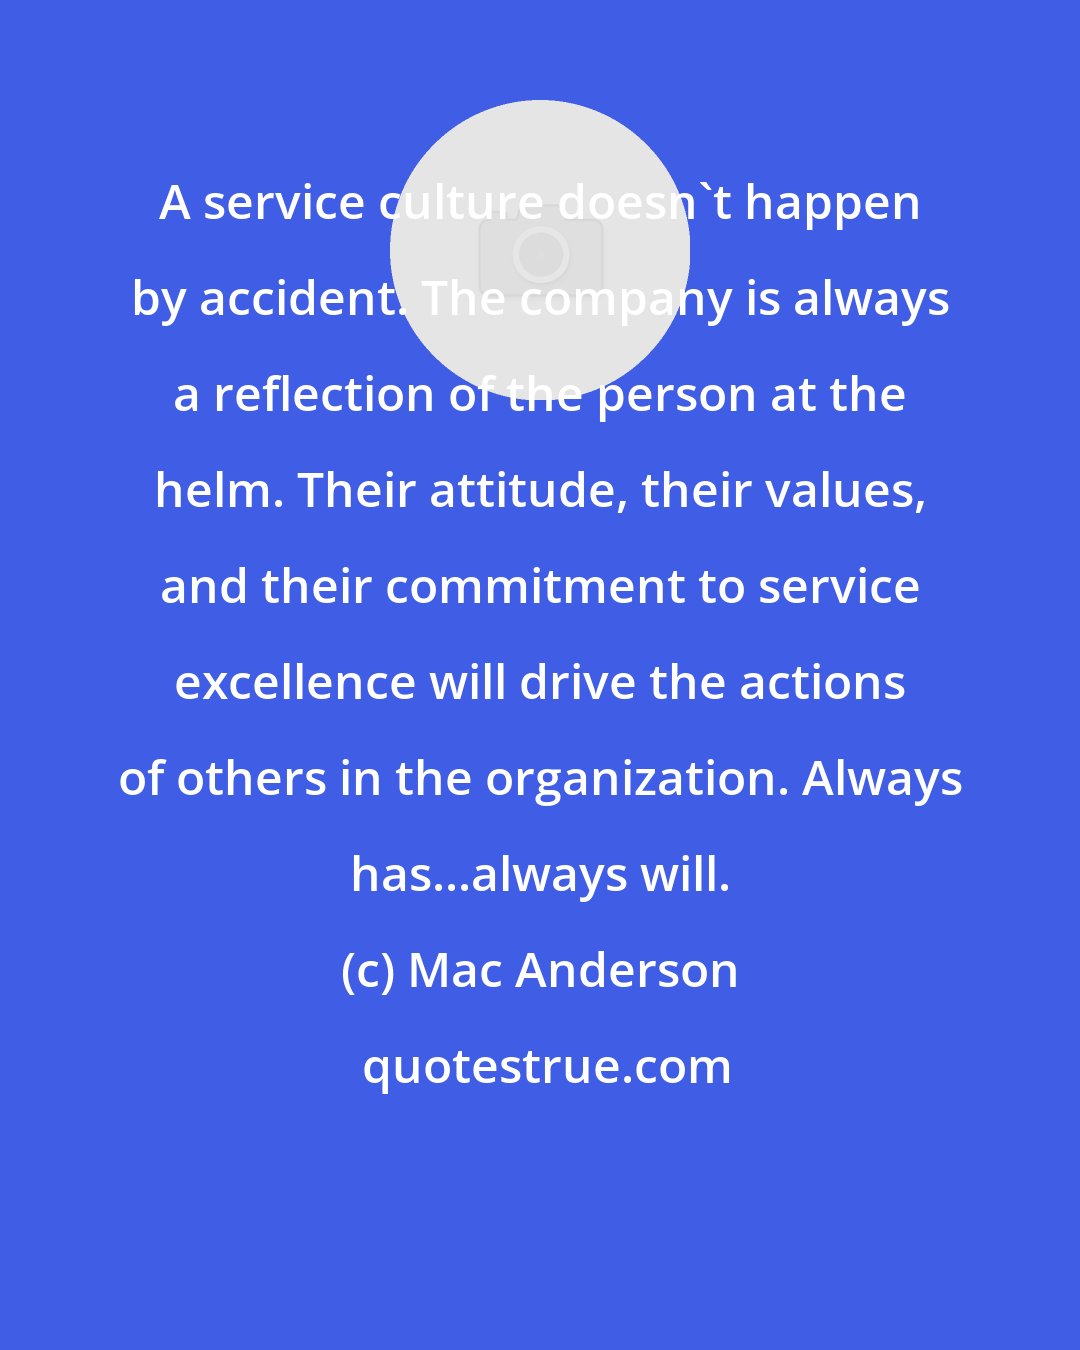 Mac Anderson: A service culture doesn't happen by accident. The company is always a reflection of the person at the helm. Their attitude, their values, and their commitment to service excellence will drive the actions of others in the organization. Always has...always will.